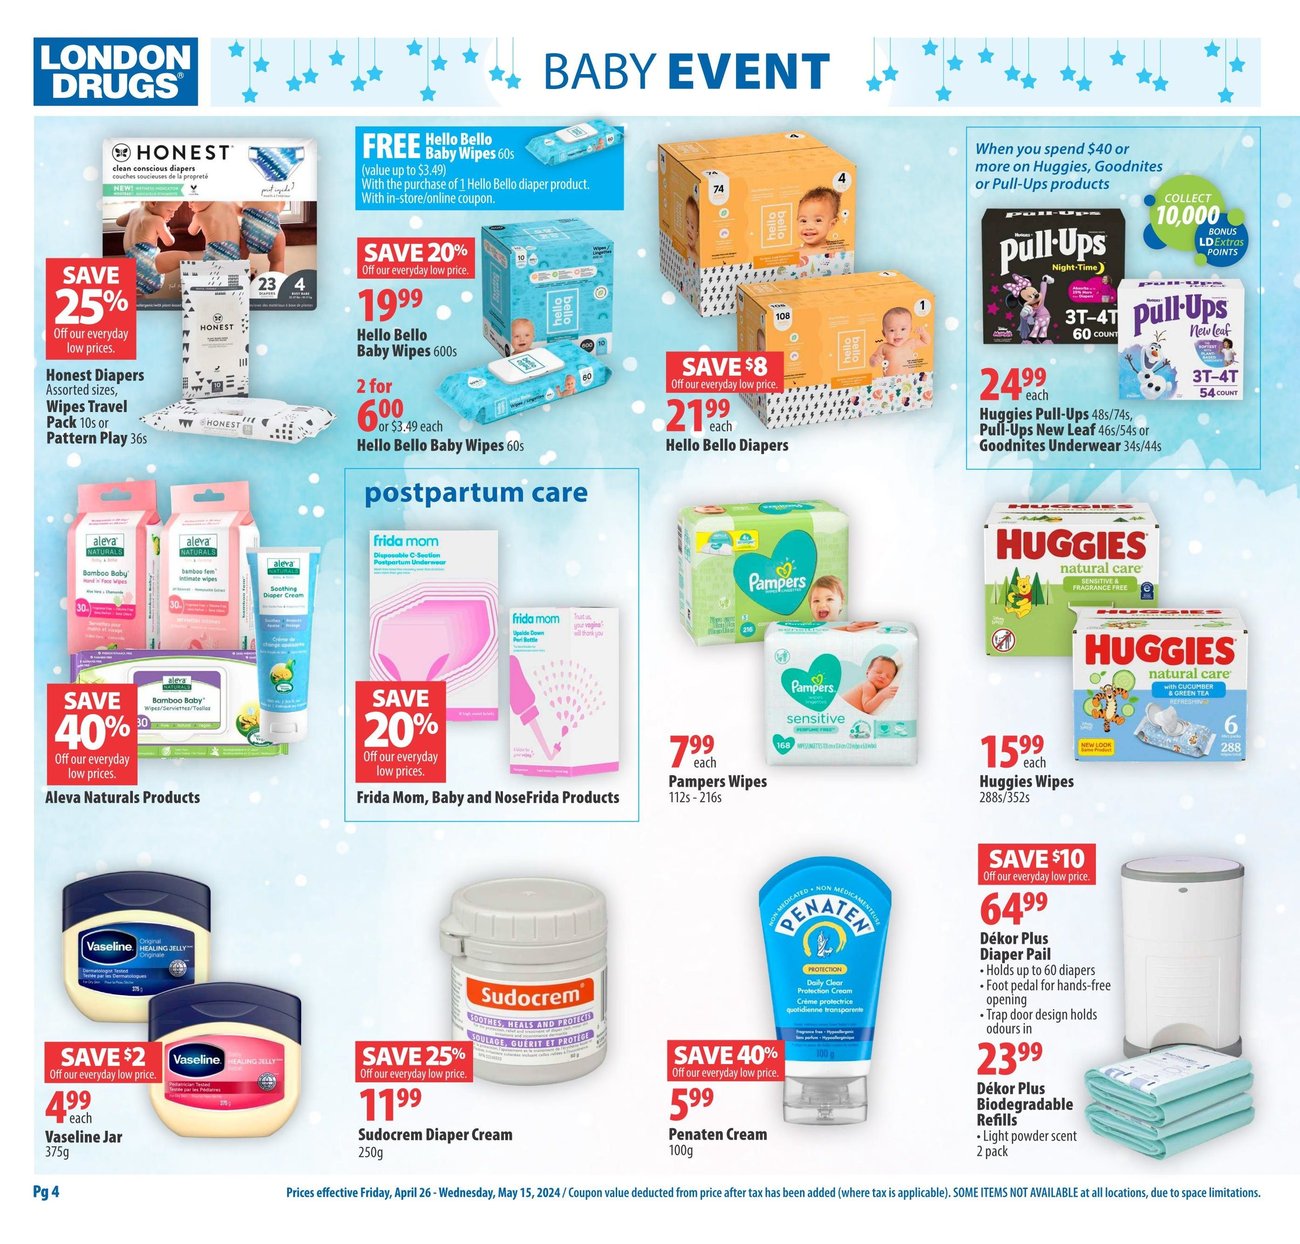 London Drugs - Baby Event - Page 5